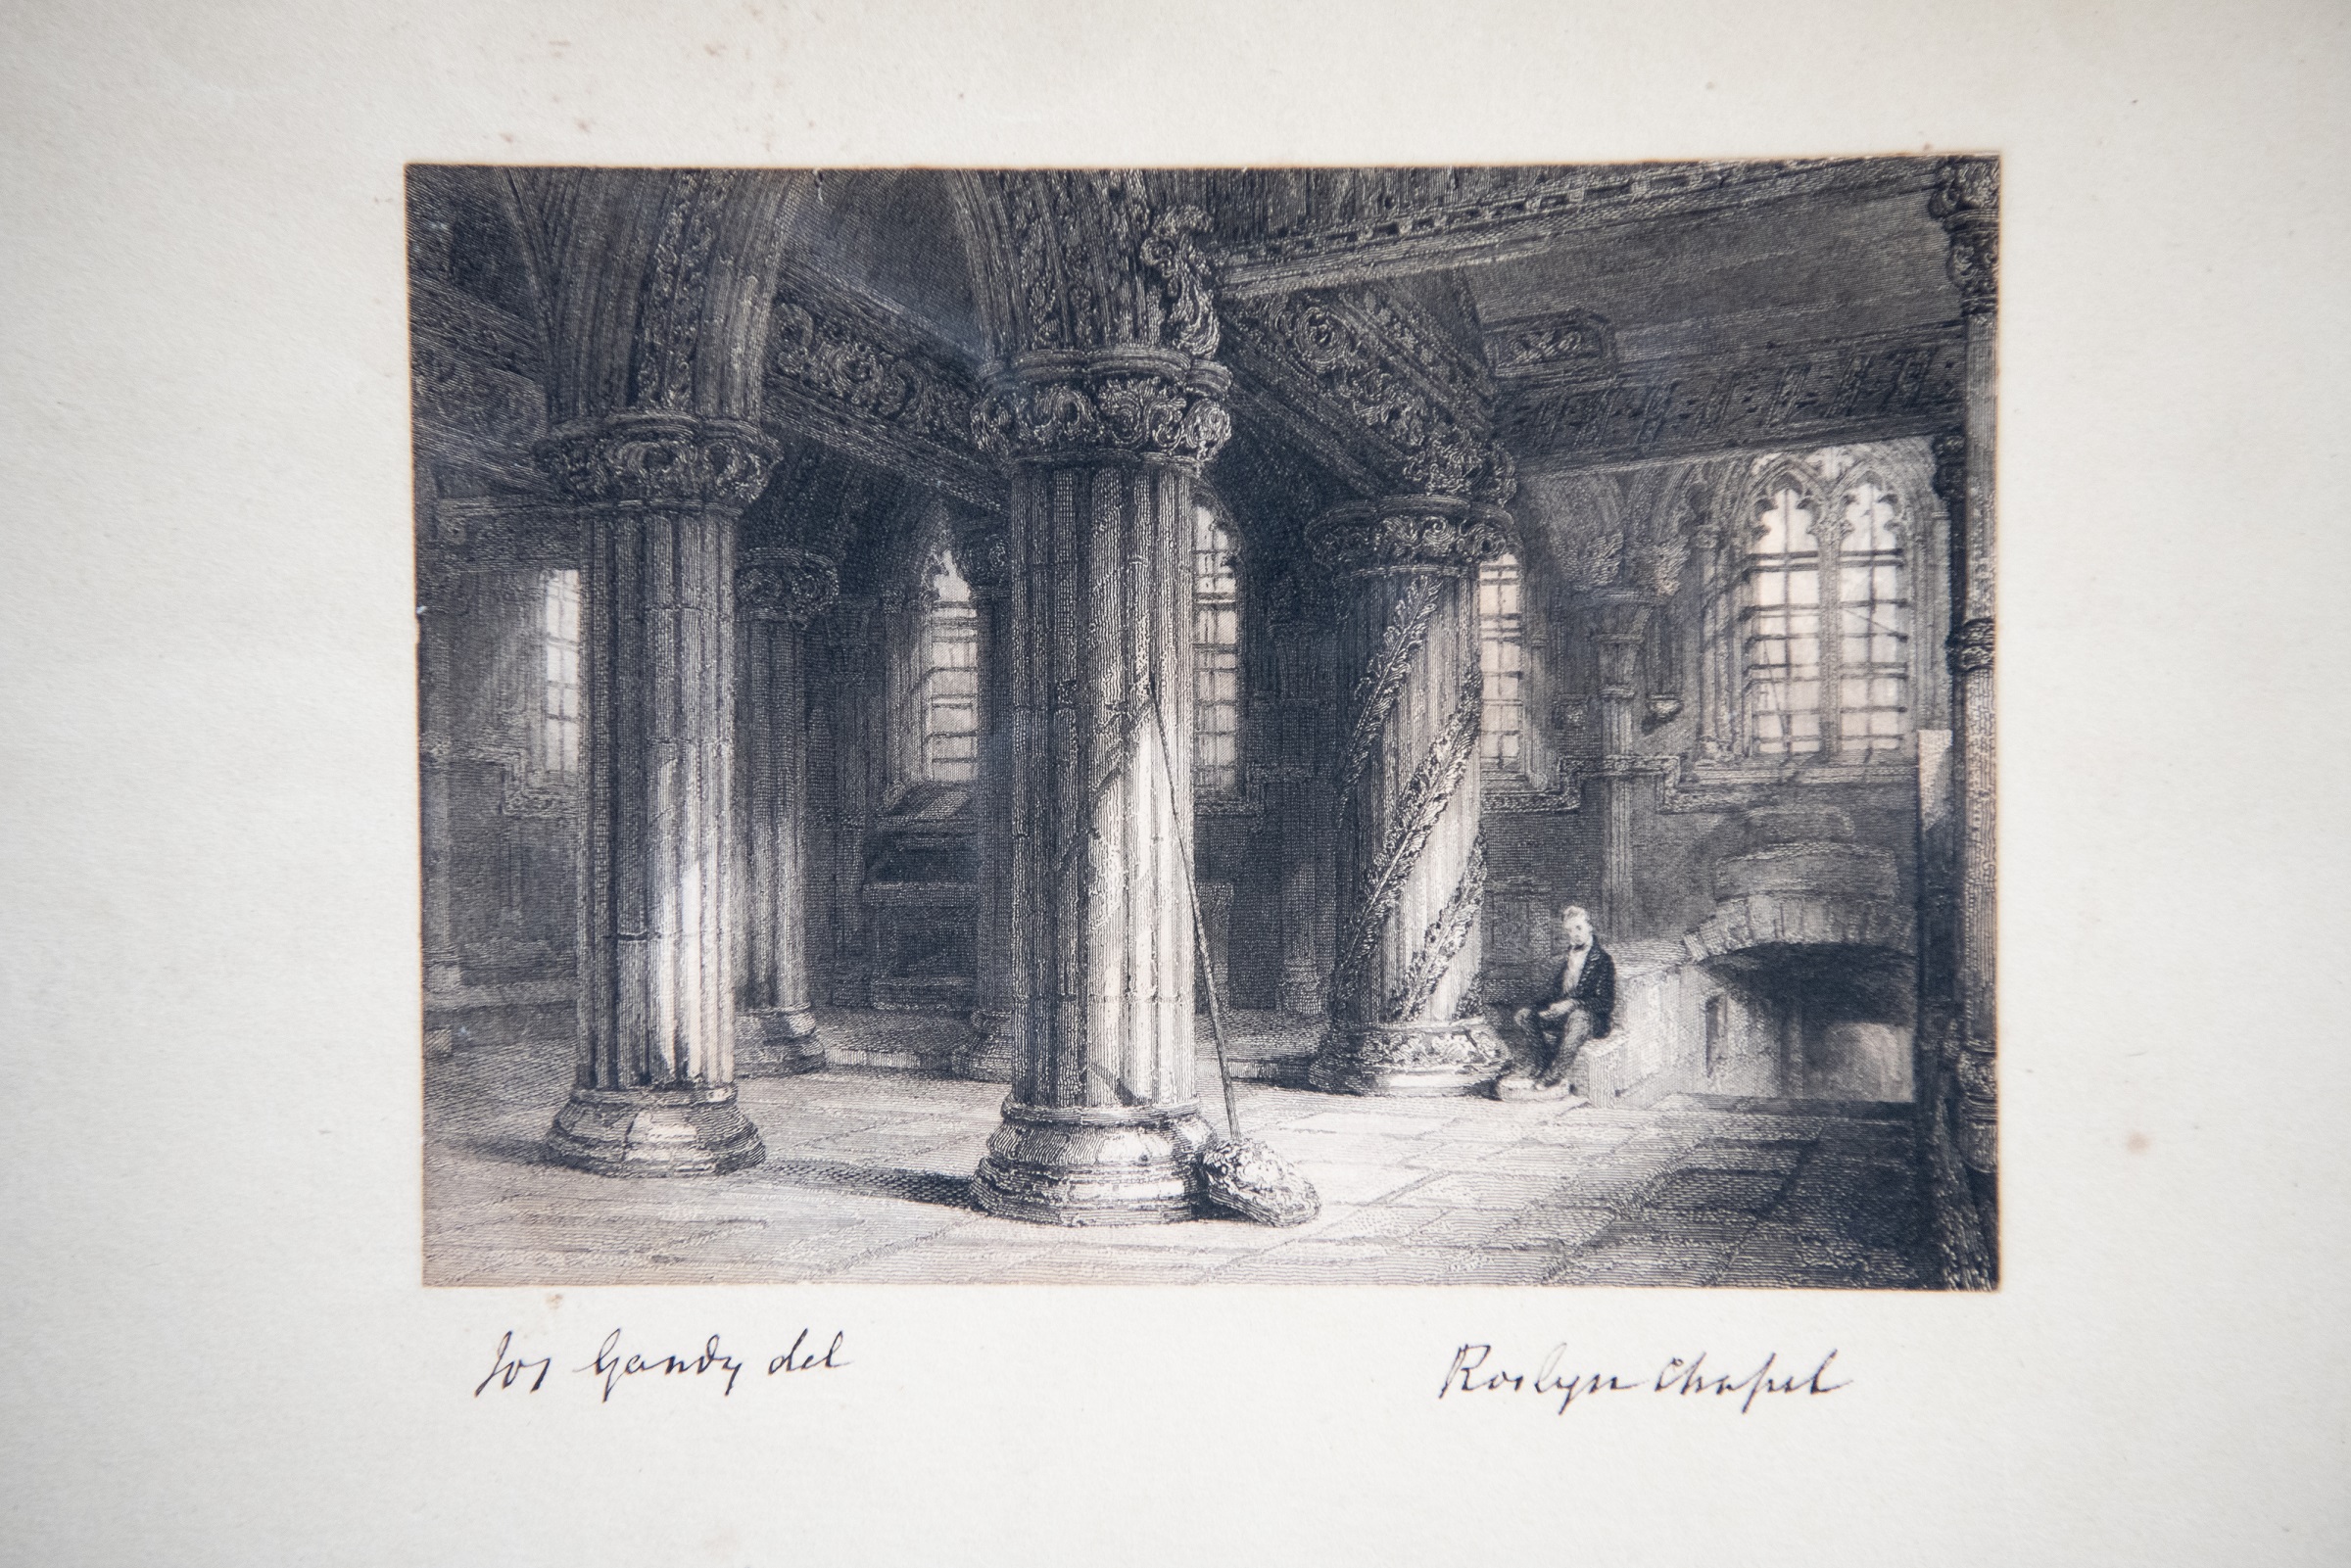 A black and white engraving showing four ornate pillars inside the chapel. 